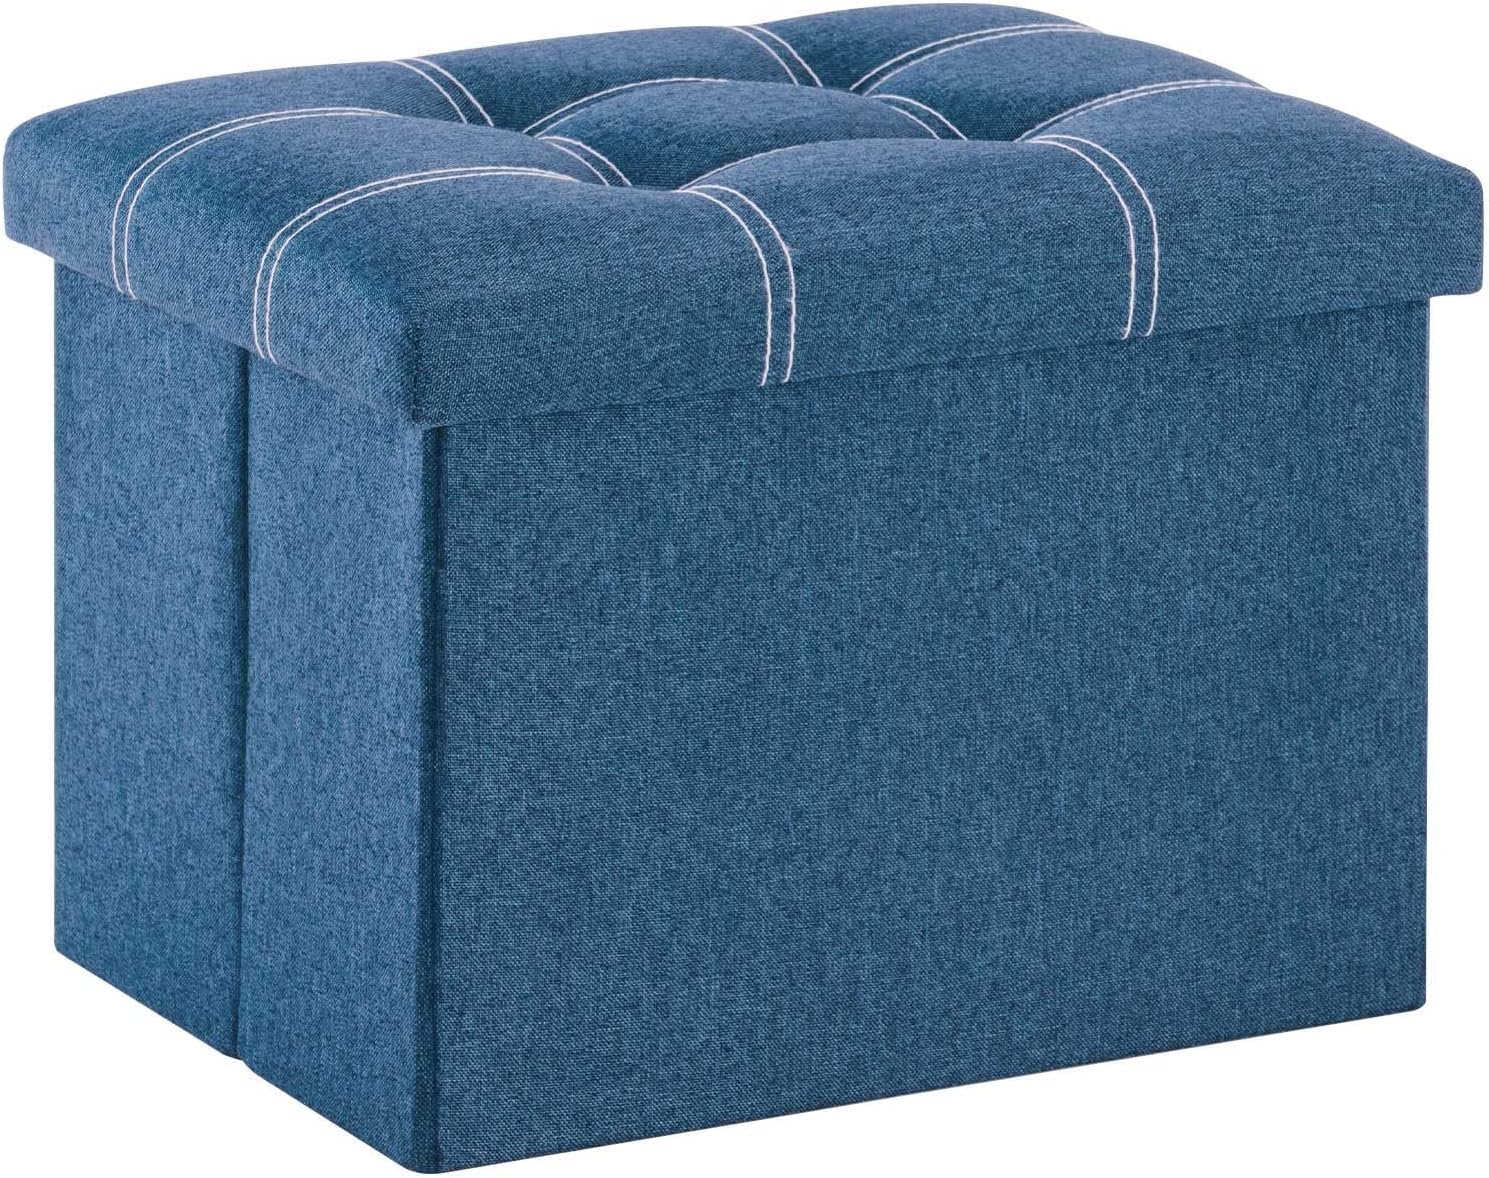 Purchased this to sit between my RV seats and placed a dog bed on top of it. It fits nicely, looks nice, and has enough room for a couple of blankets. It will also work nicely for an extra little seat although it is a bit short to sit next to the dinette.